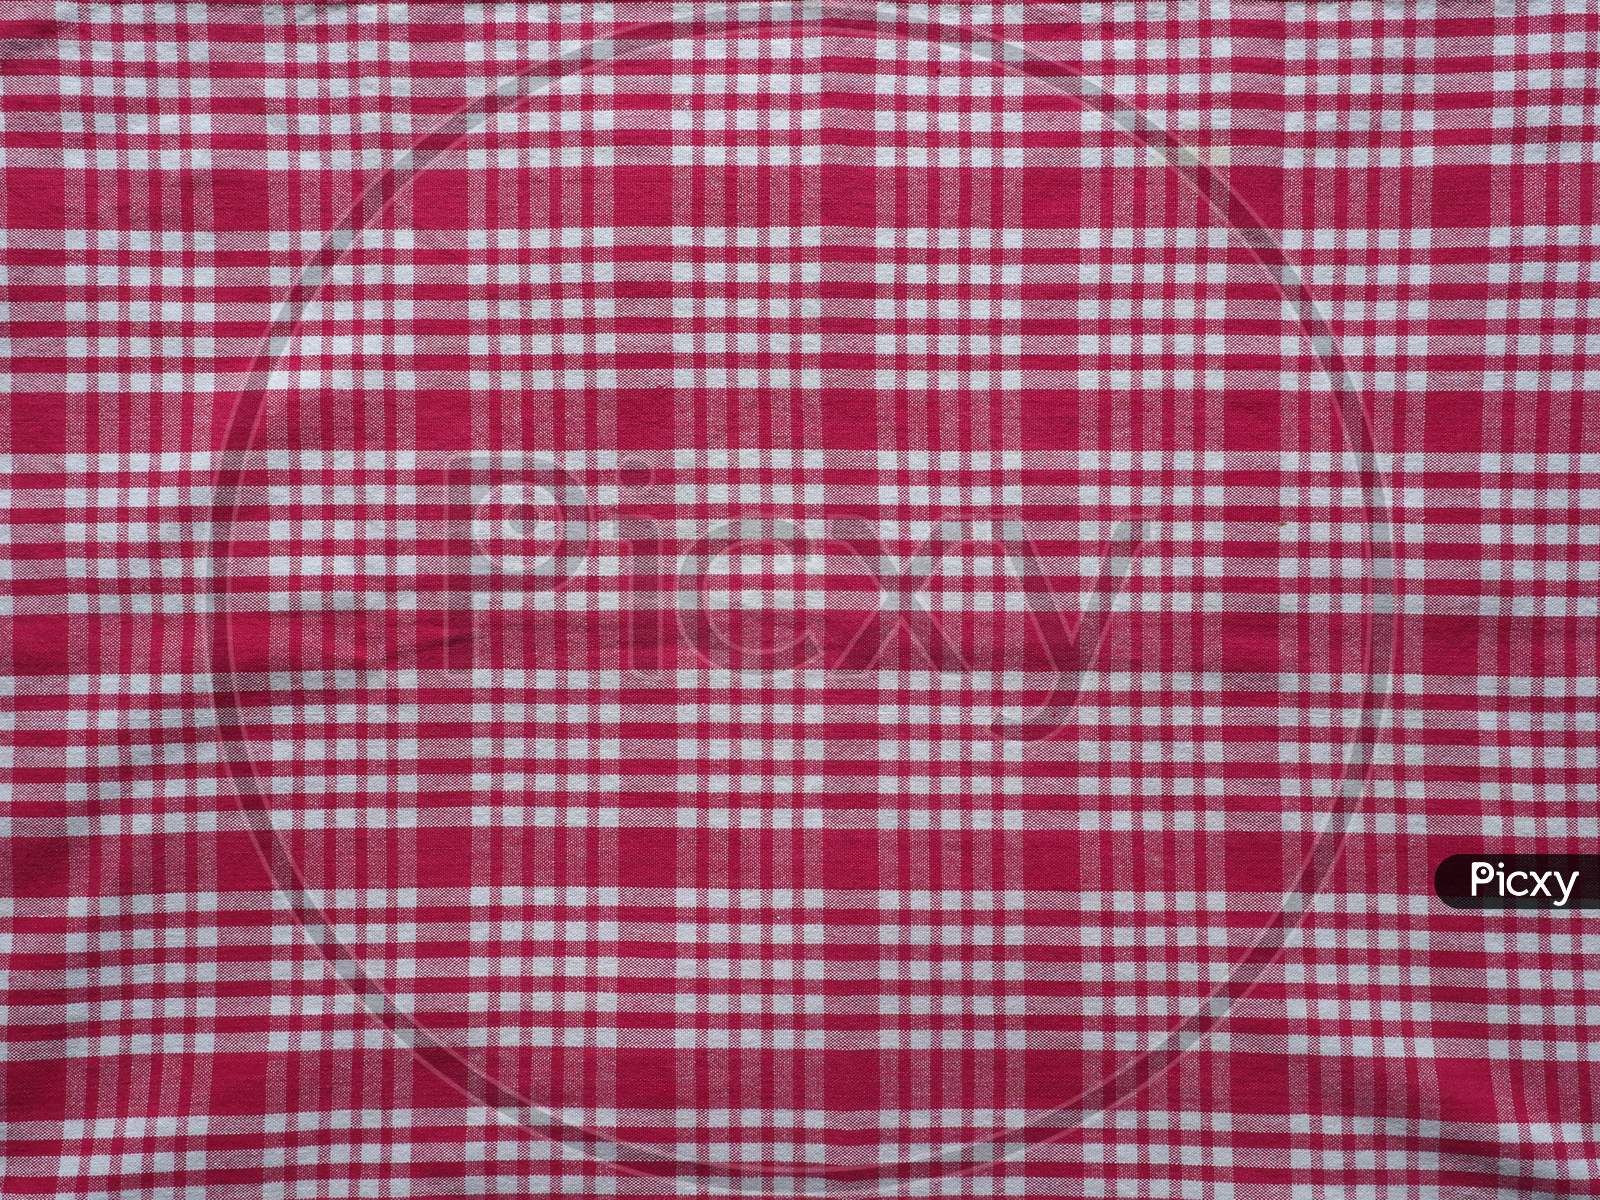 Chequered Red Fabric Texture Background